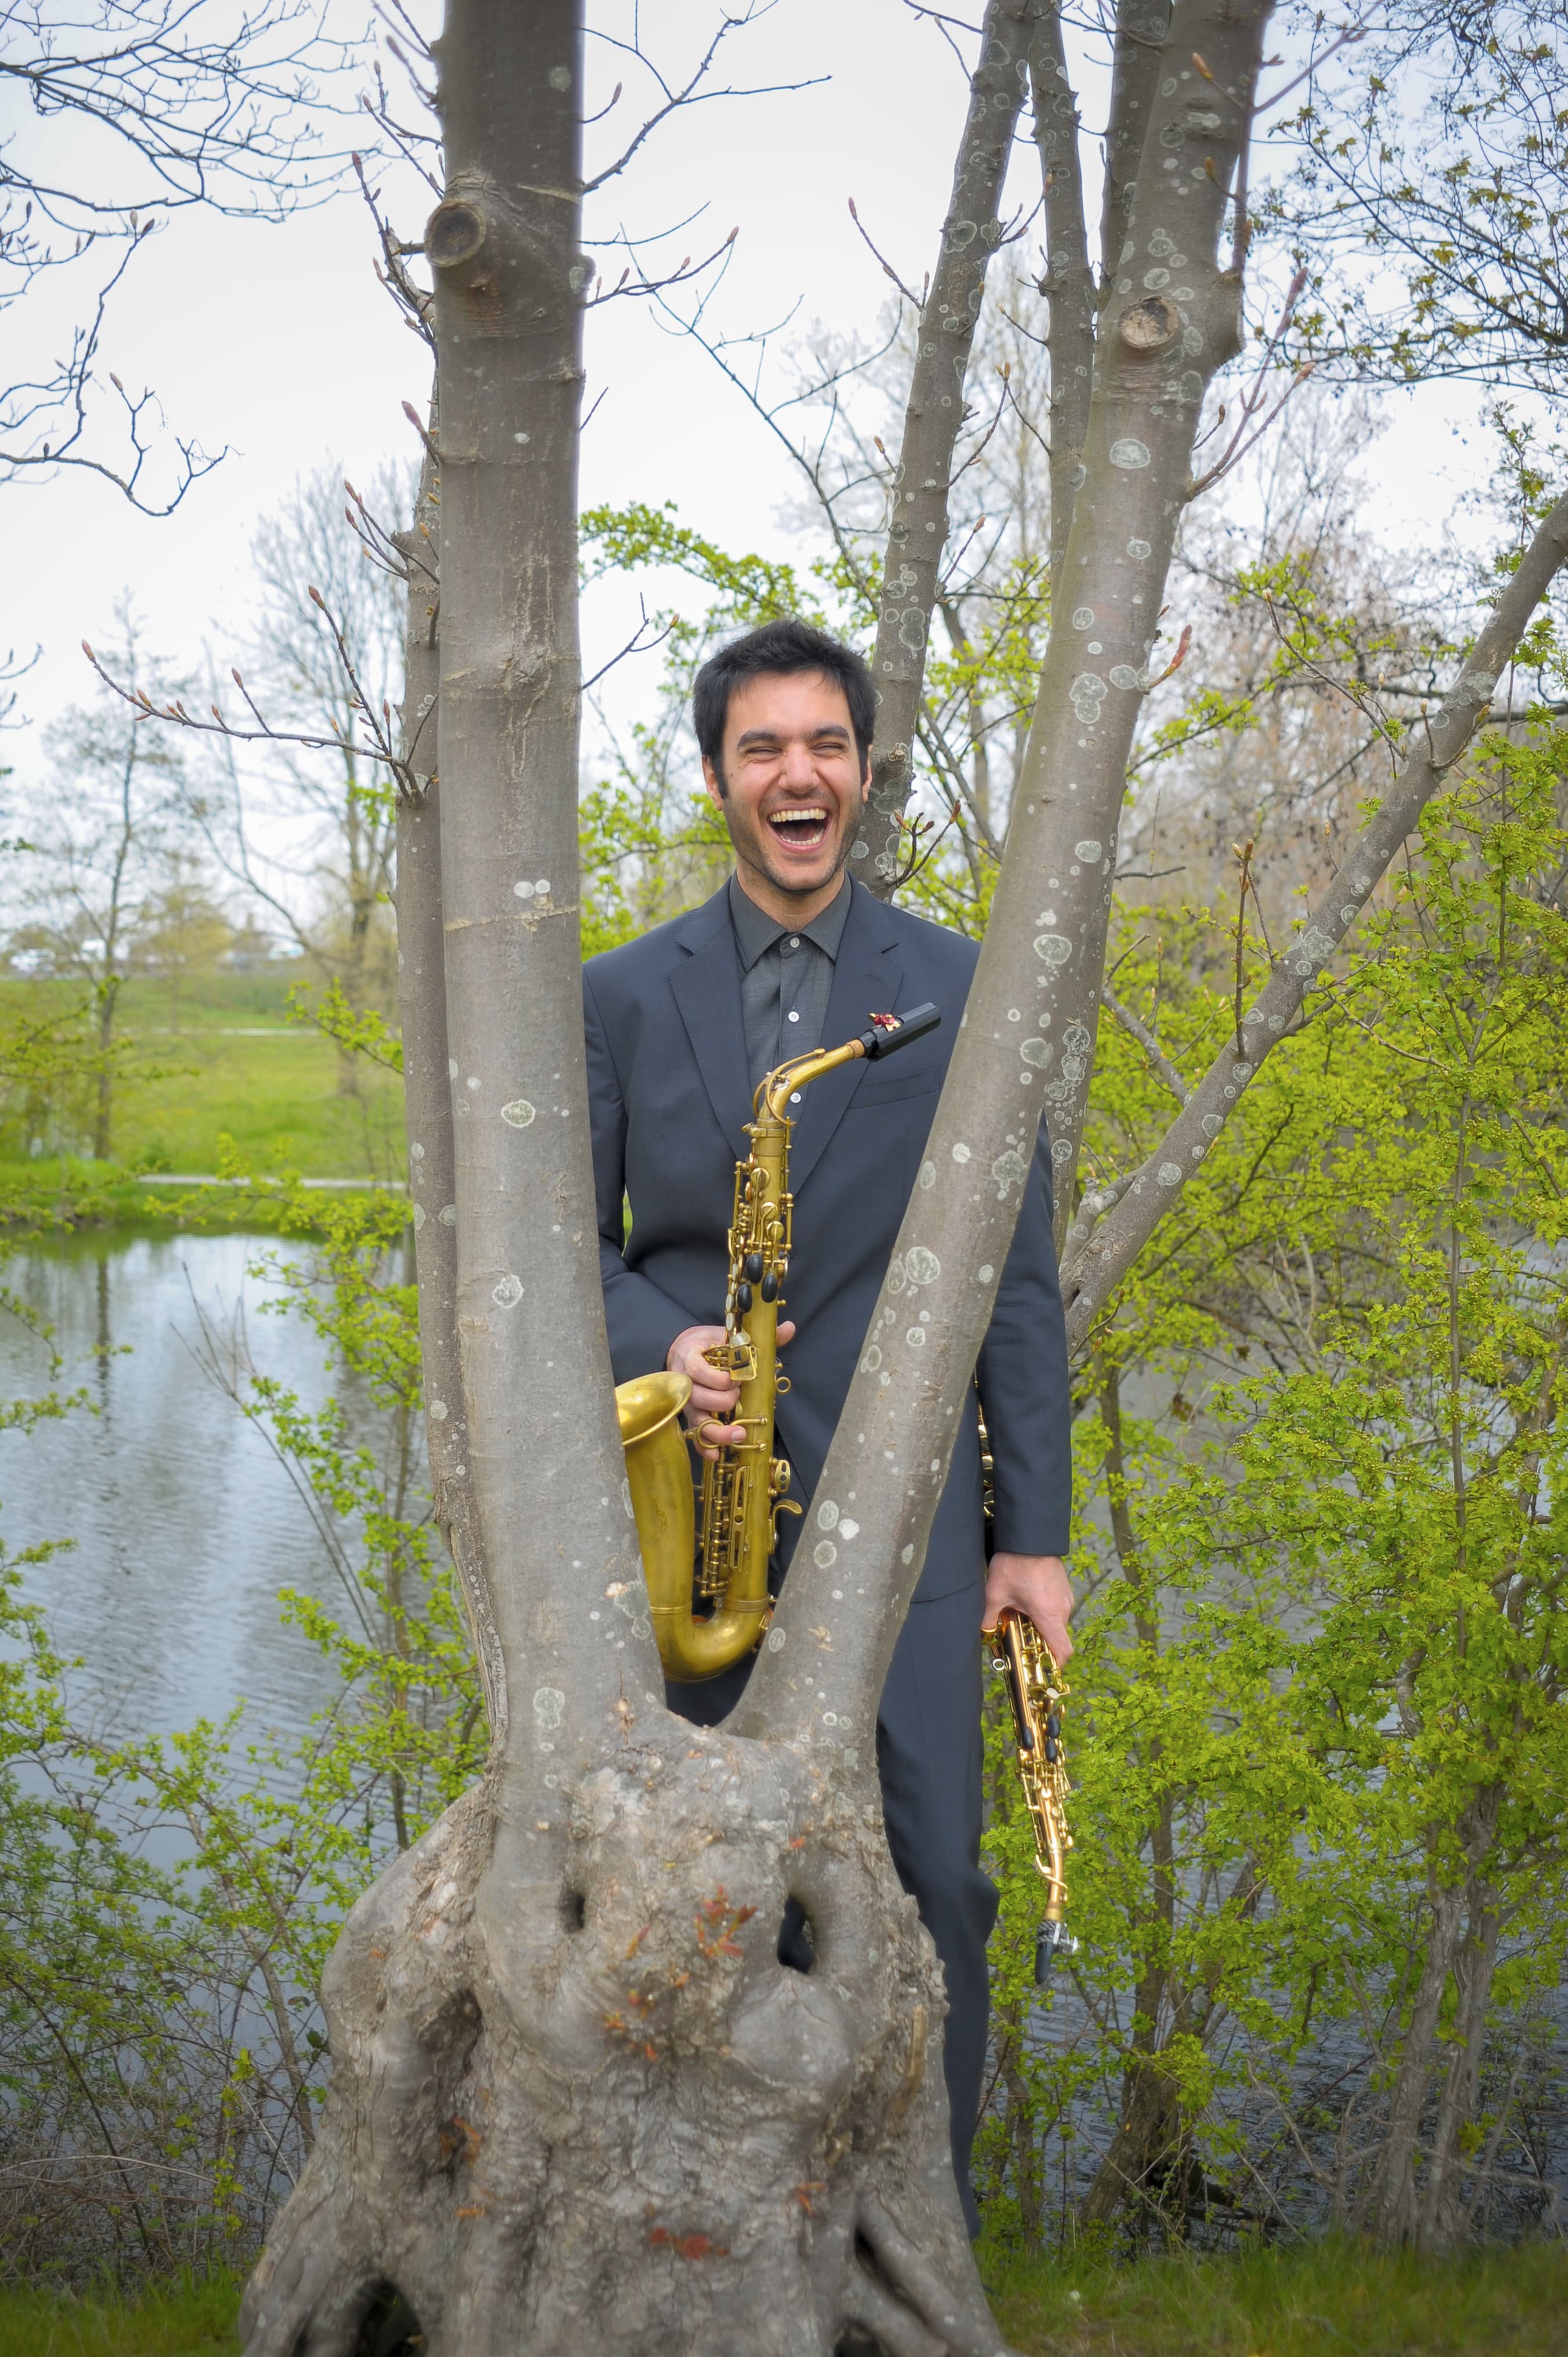 the artist holding his saxophone, smiling behind a tree